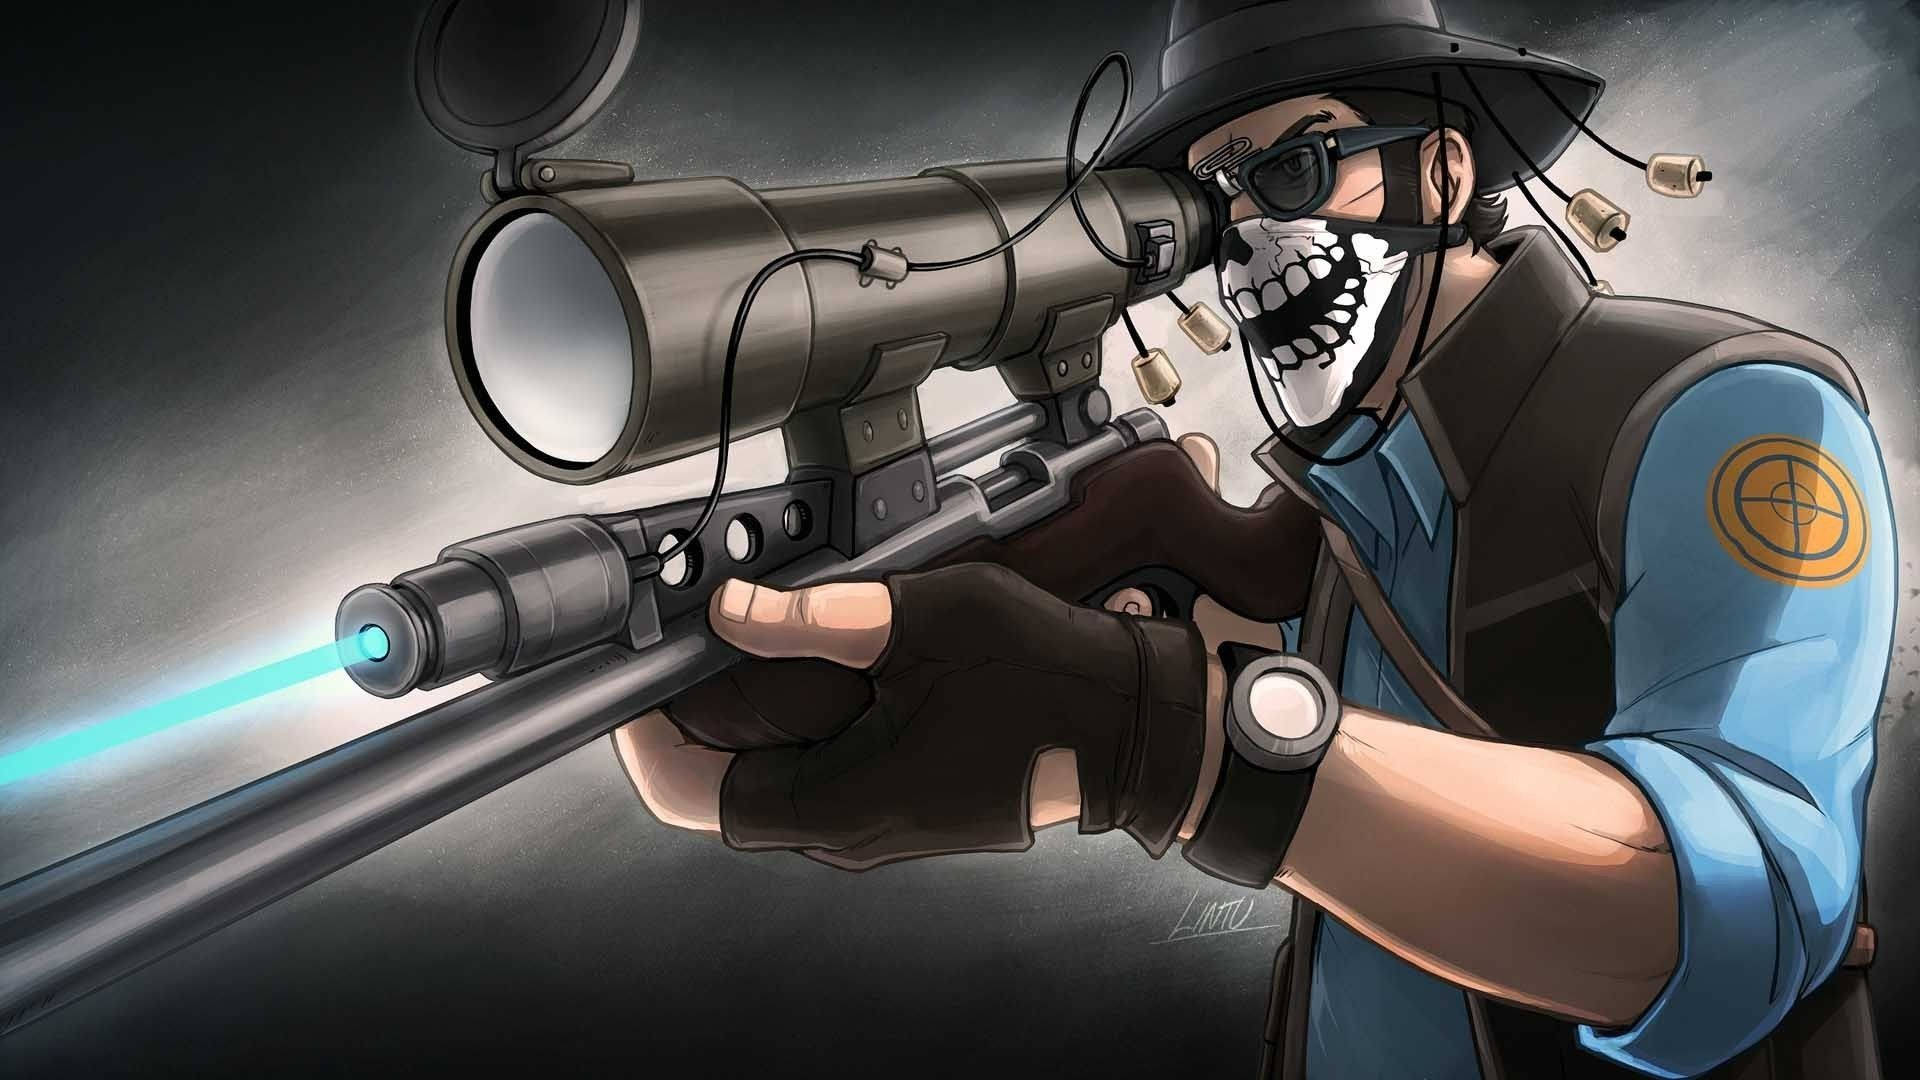 Intense Gaze From The Sniper, Team Fortress 2's Precision Expert